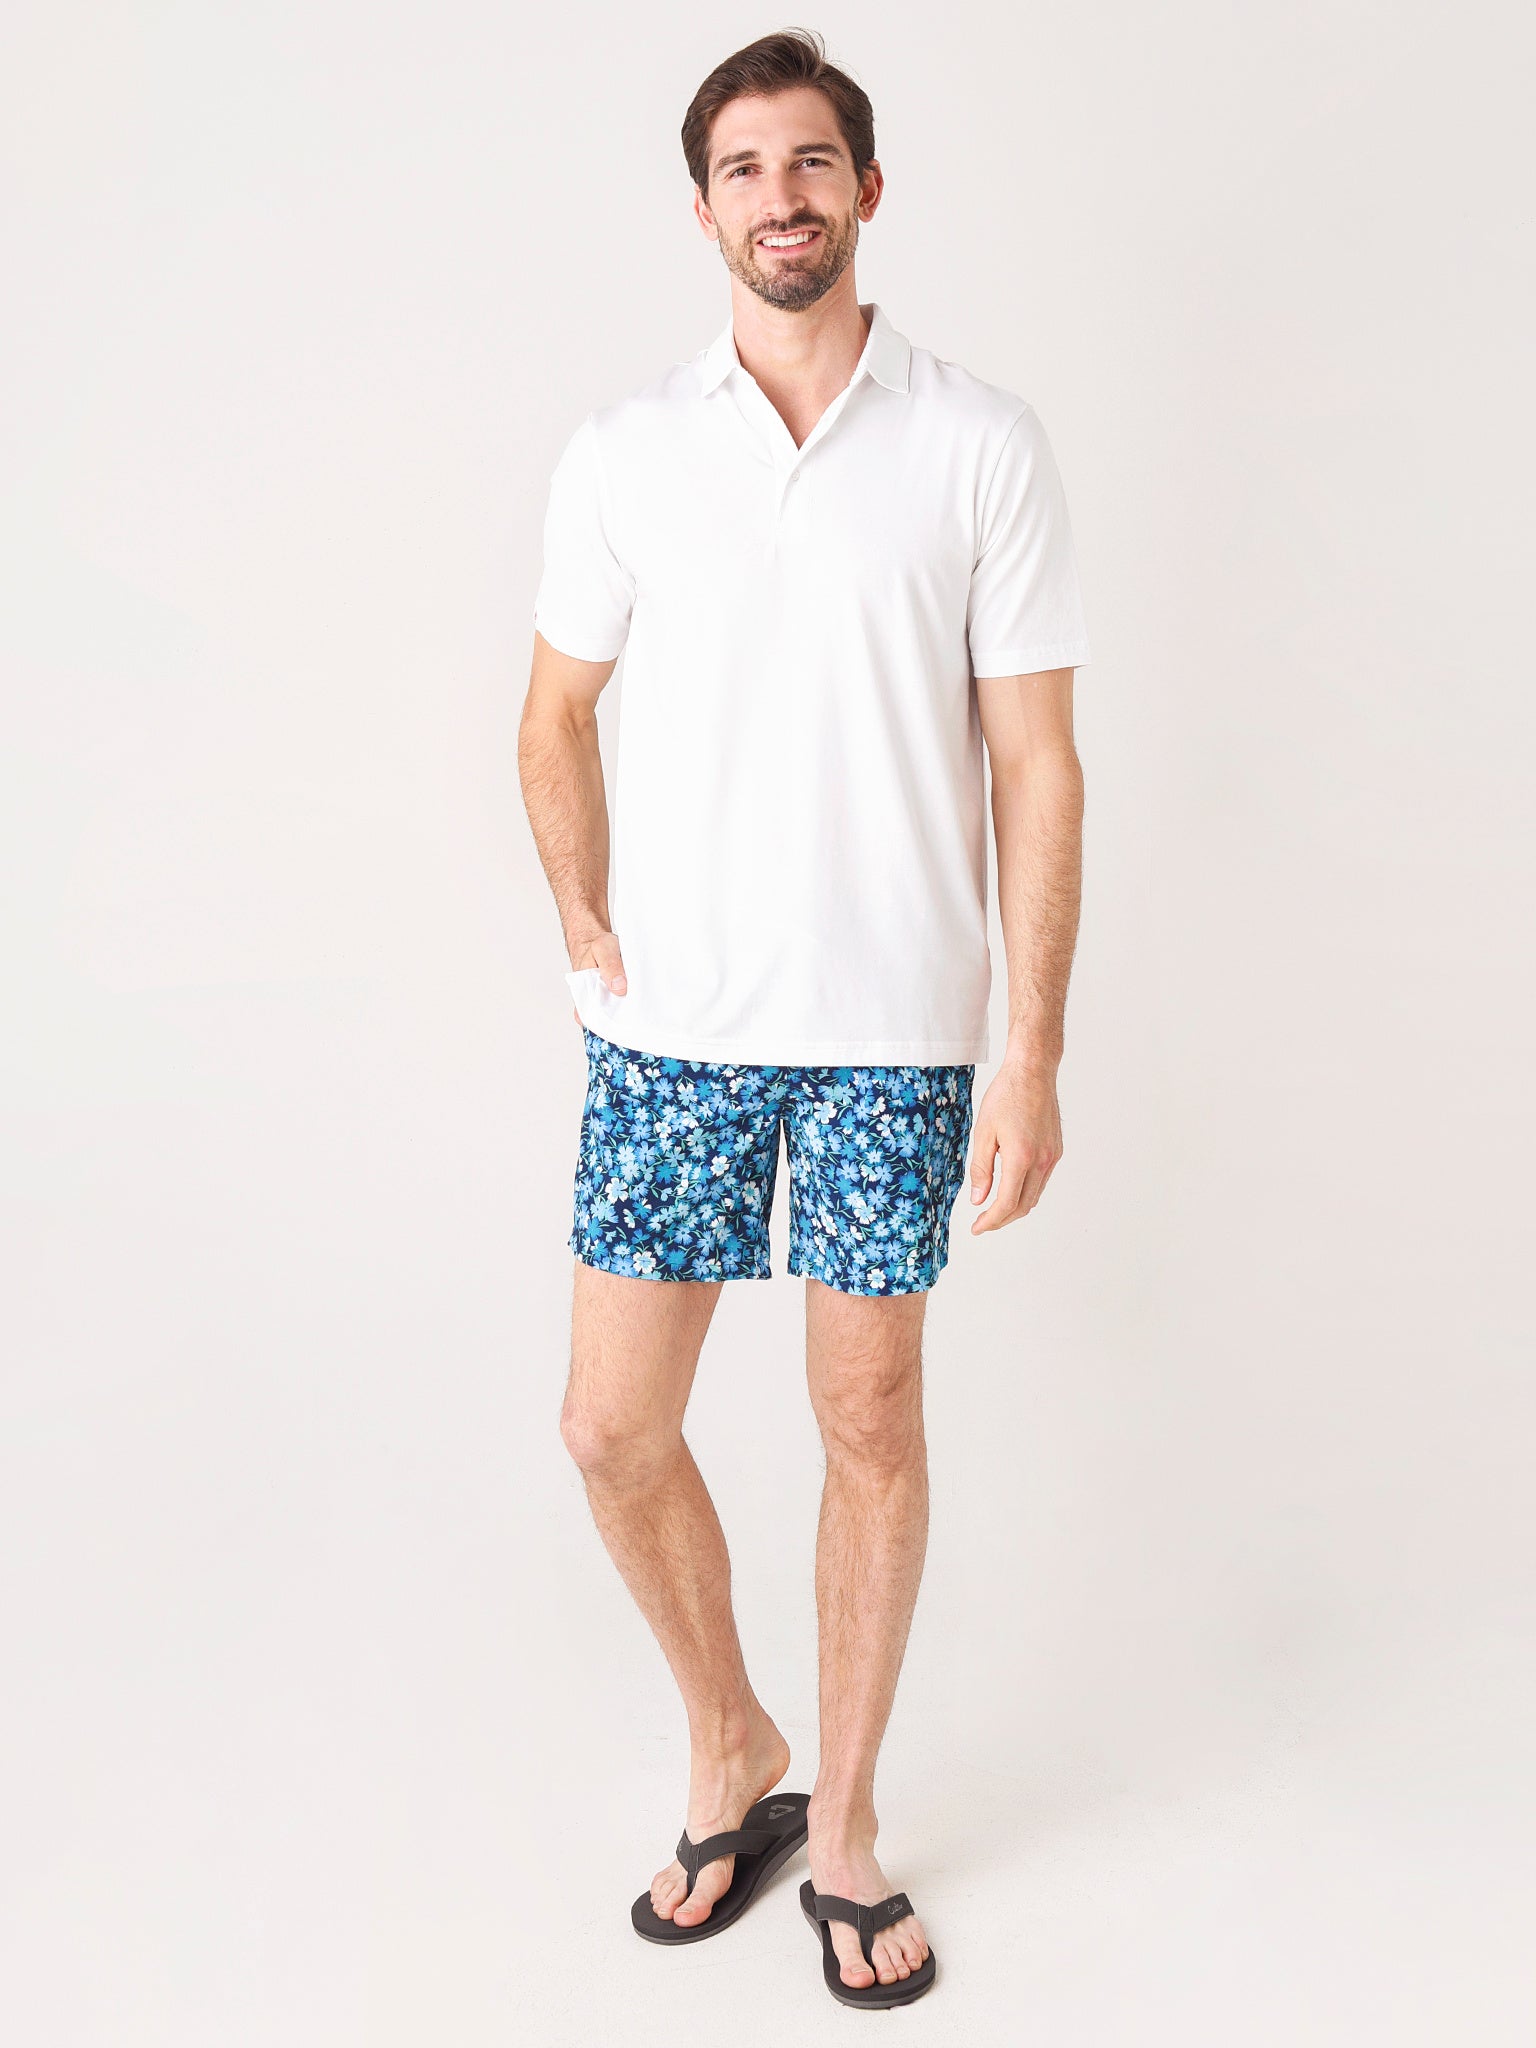 Riviera Recycled Swim Trunks for Men by Bonobos - Blue Picnic Floral - L9 One Fit